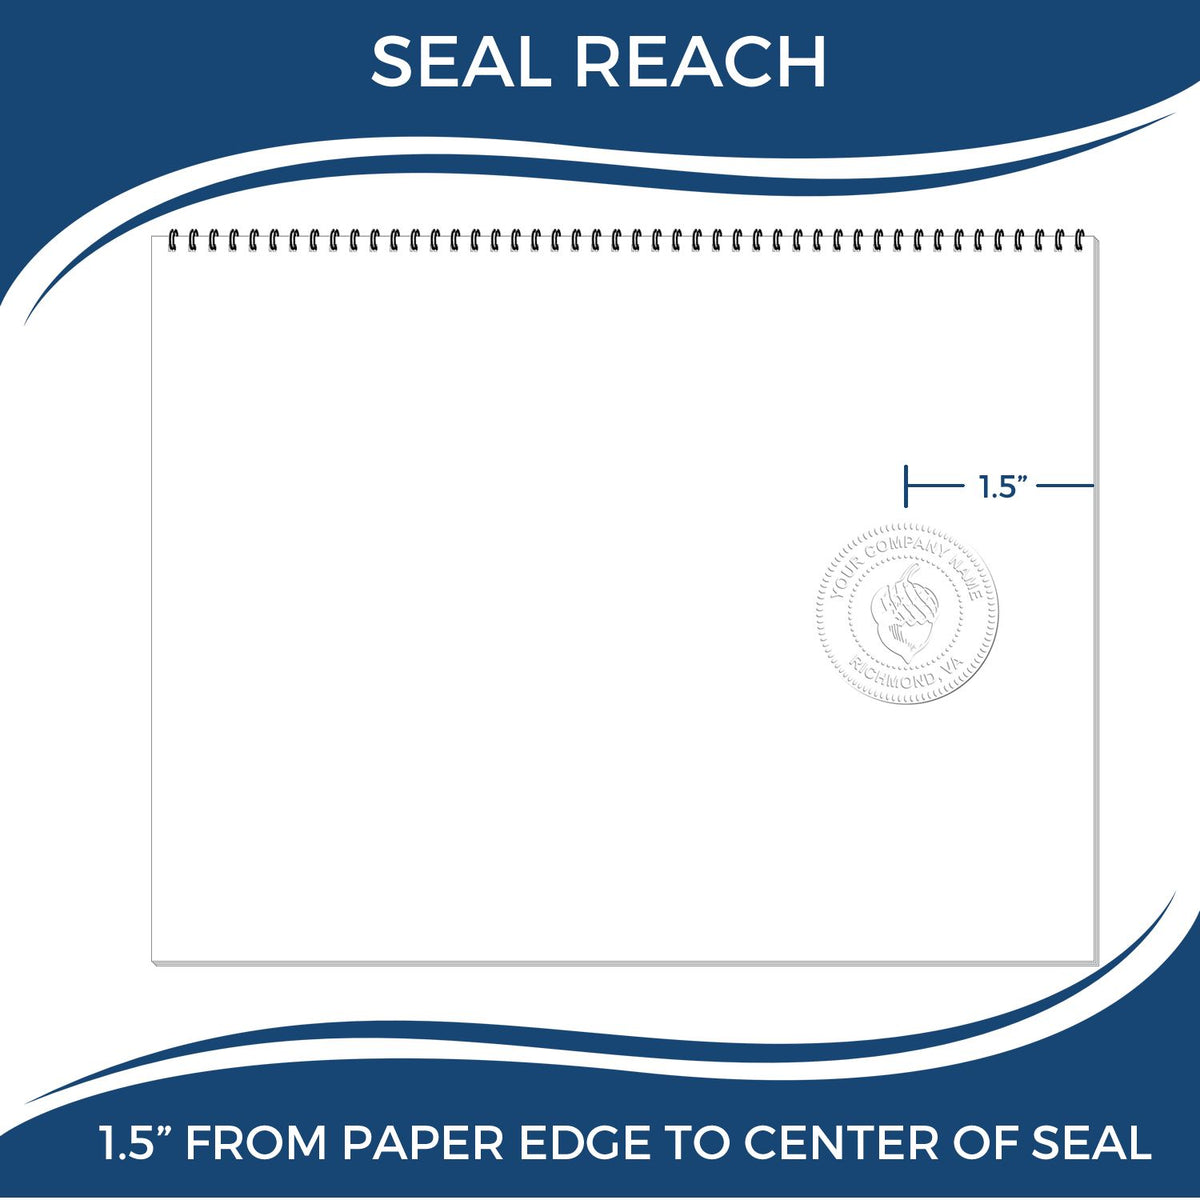 An infographic showing the seal reach which is represented by a ruler and a miniature seal image of the State of Washington Soft Land Surveyor Embossing Seal